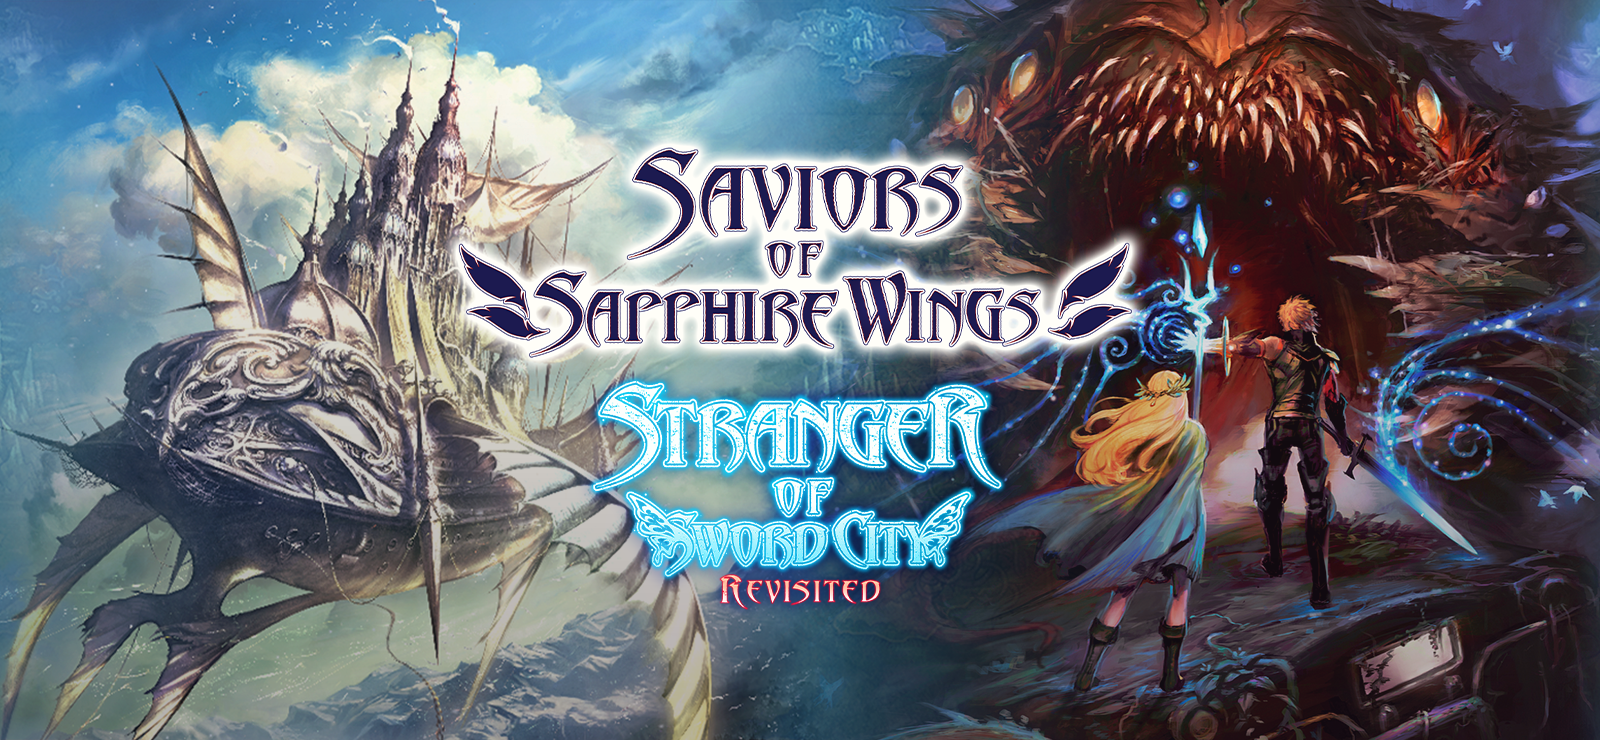 Saviors Of Sapphire Wings / Stranger Of Sword City Revisited